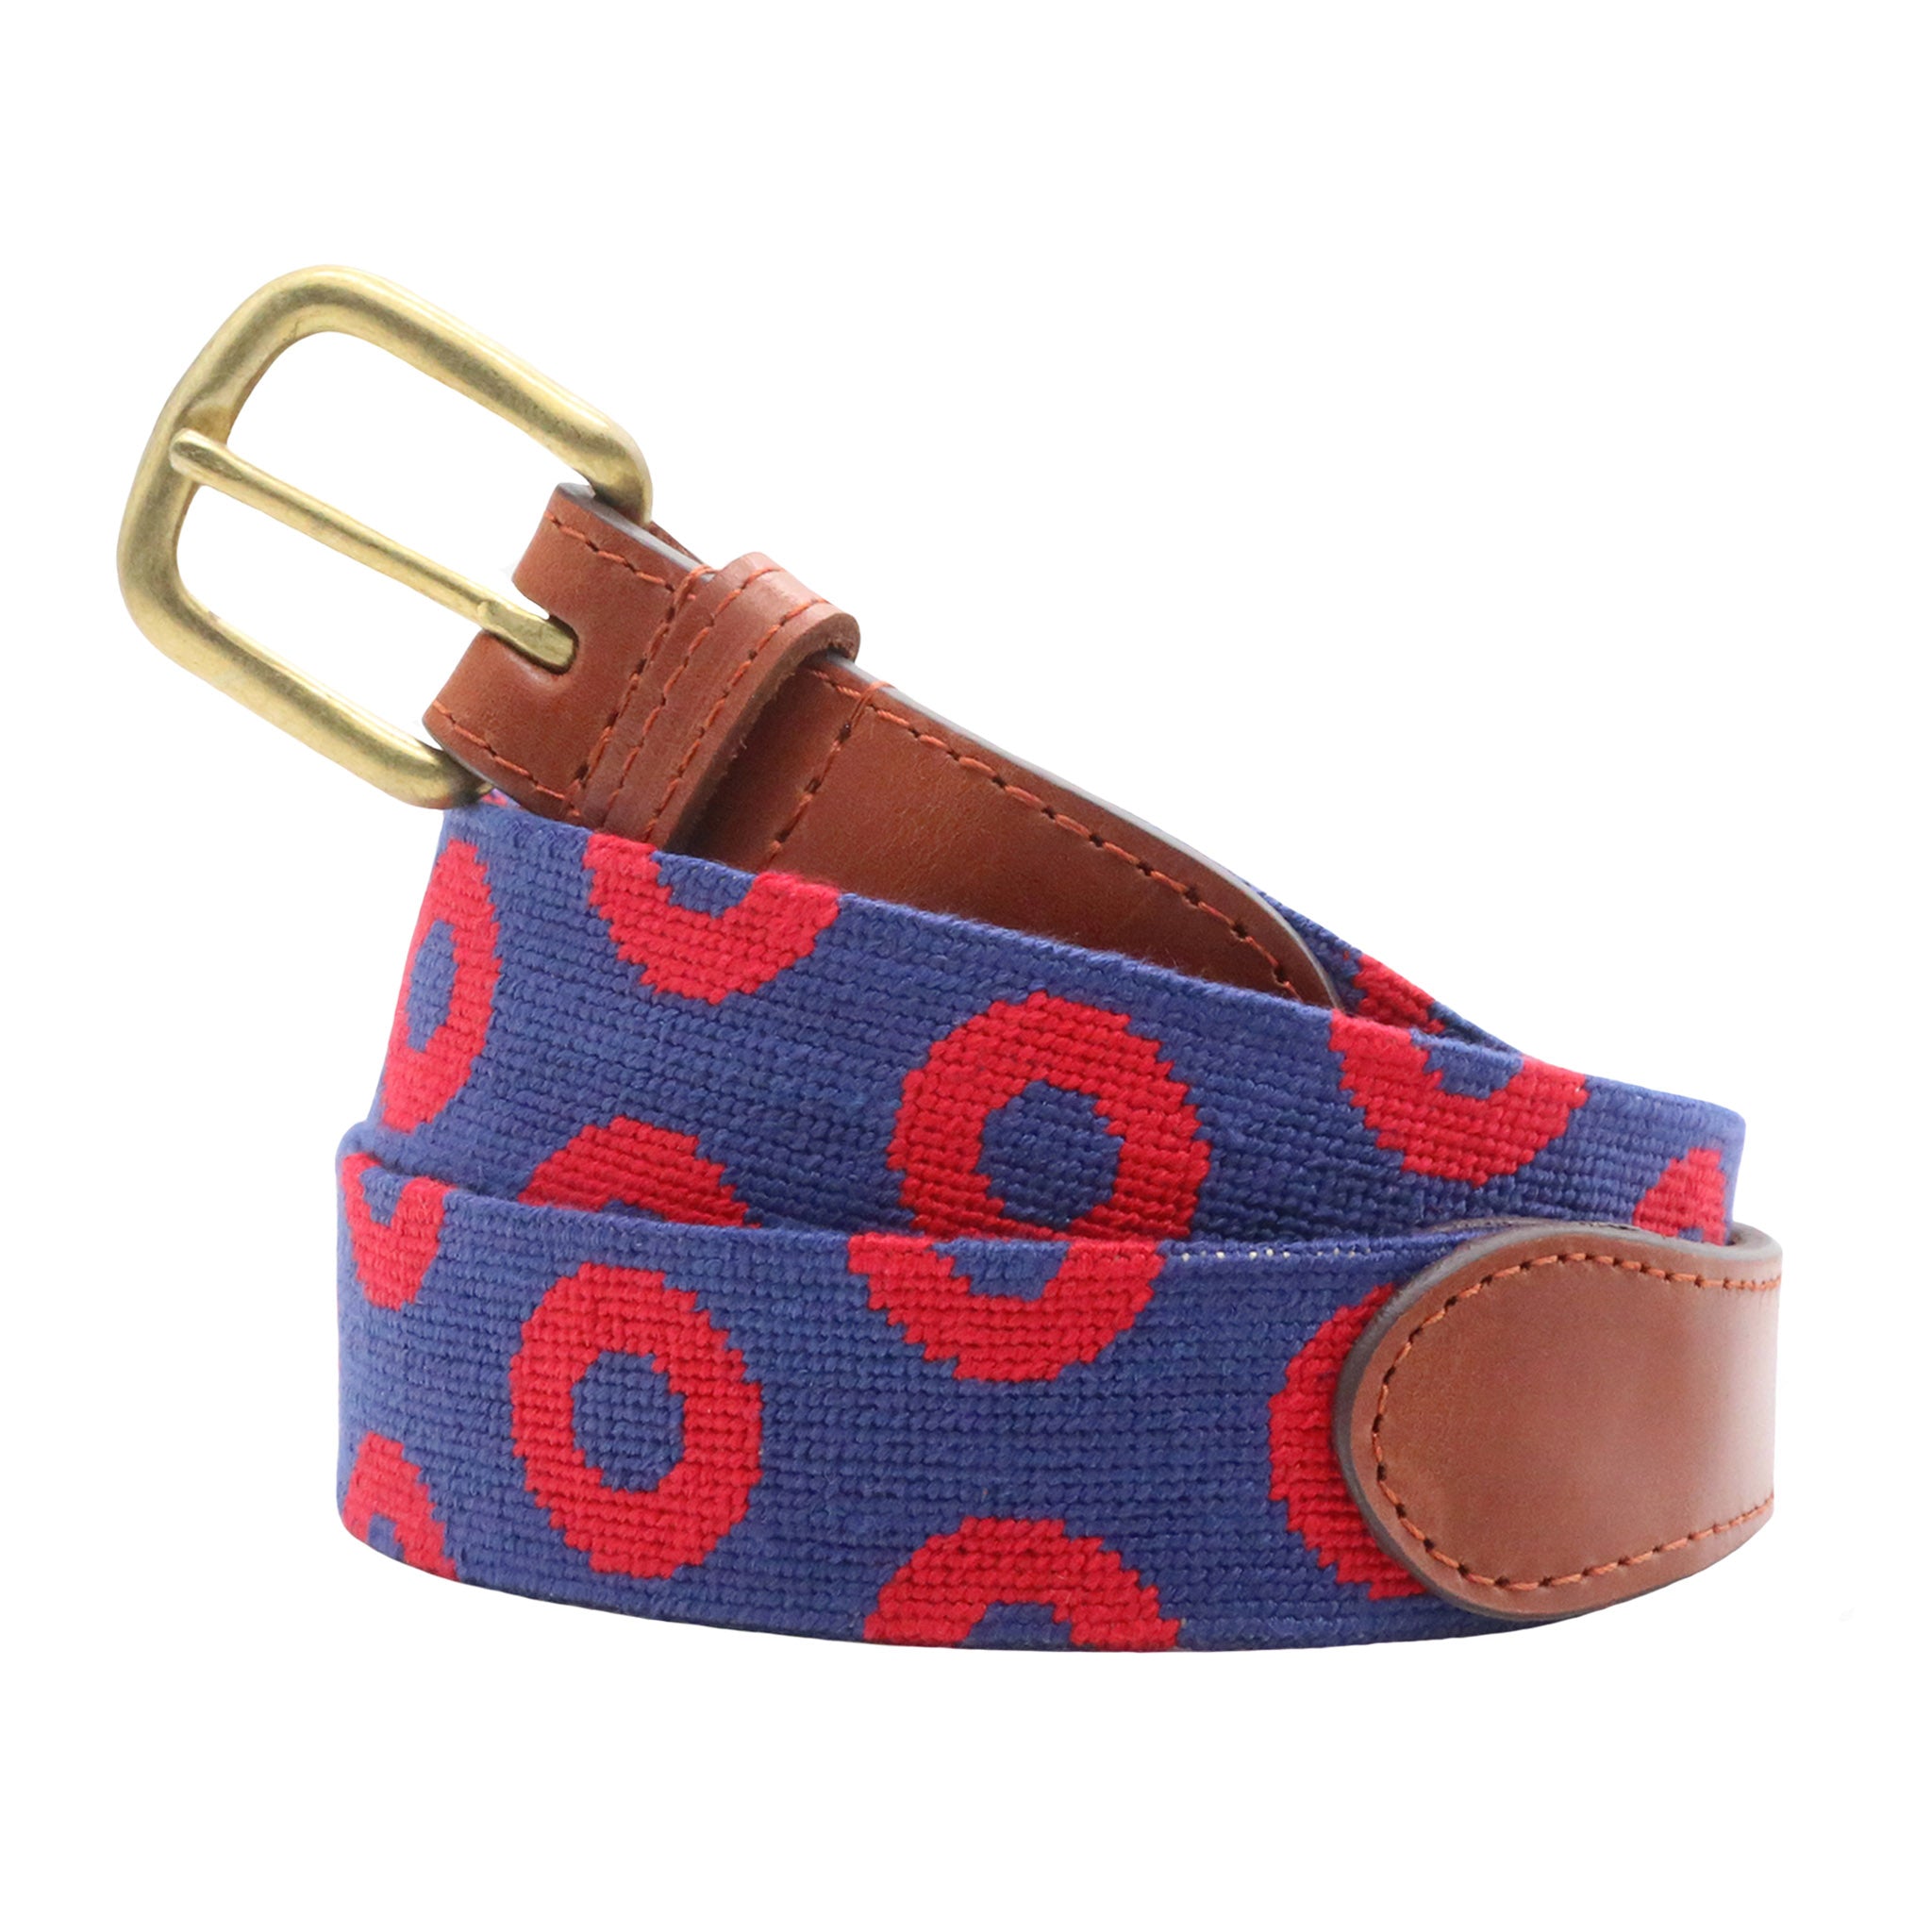 The Donut Pattern - – Navy Donuts) (Classic Red & Branson Smathers Belt